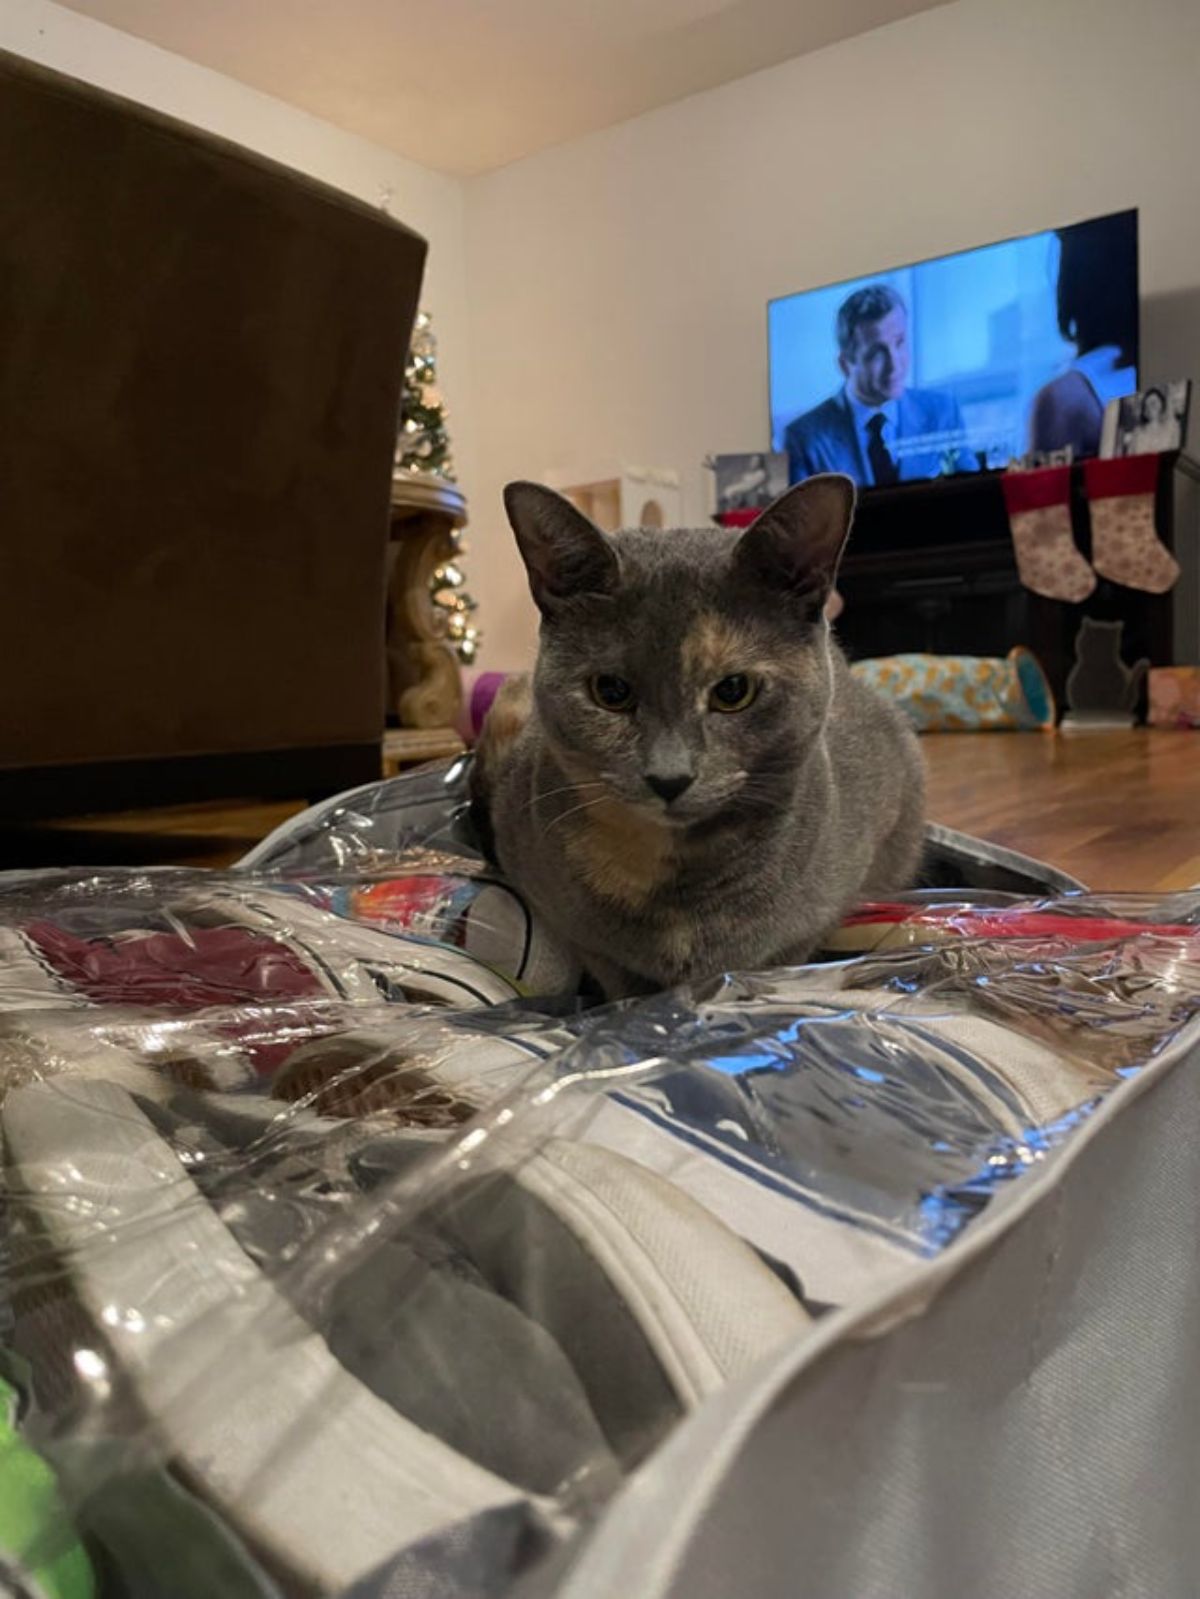 grey and orange cat sitting on shoes placed inside transparent plastic bags